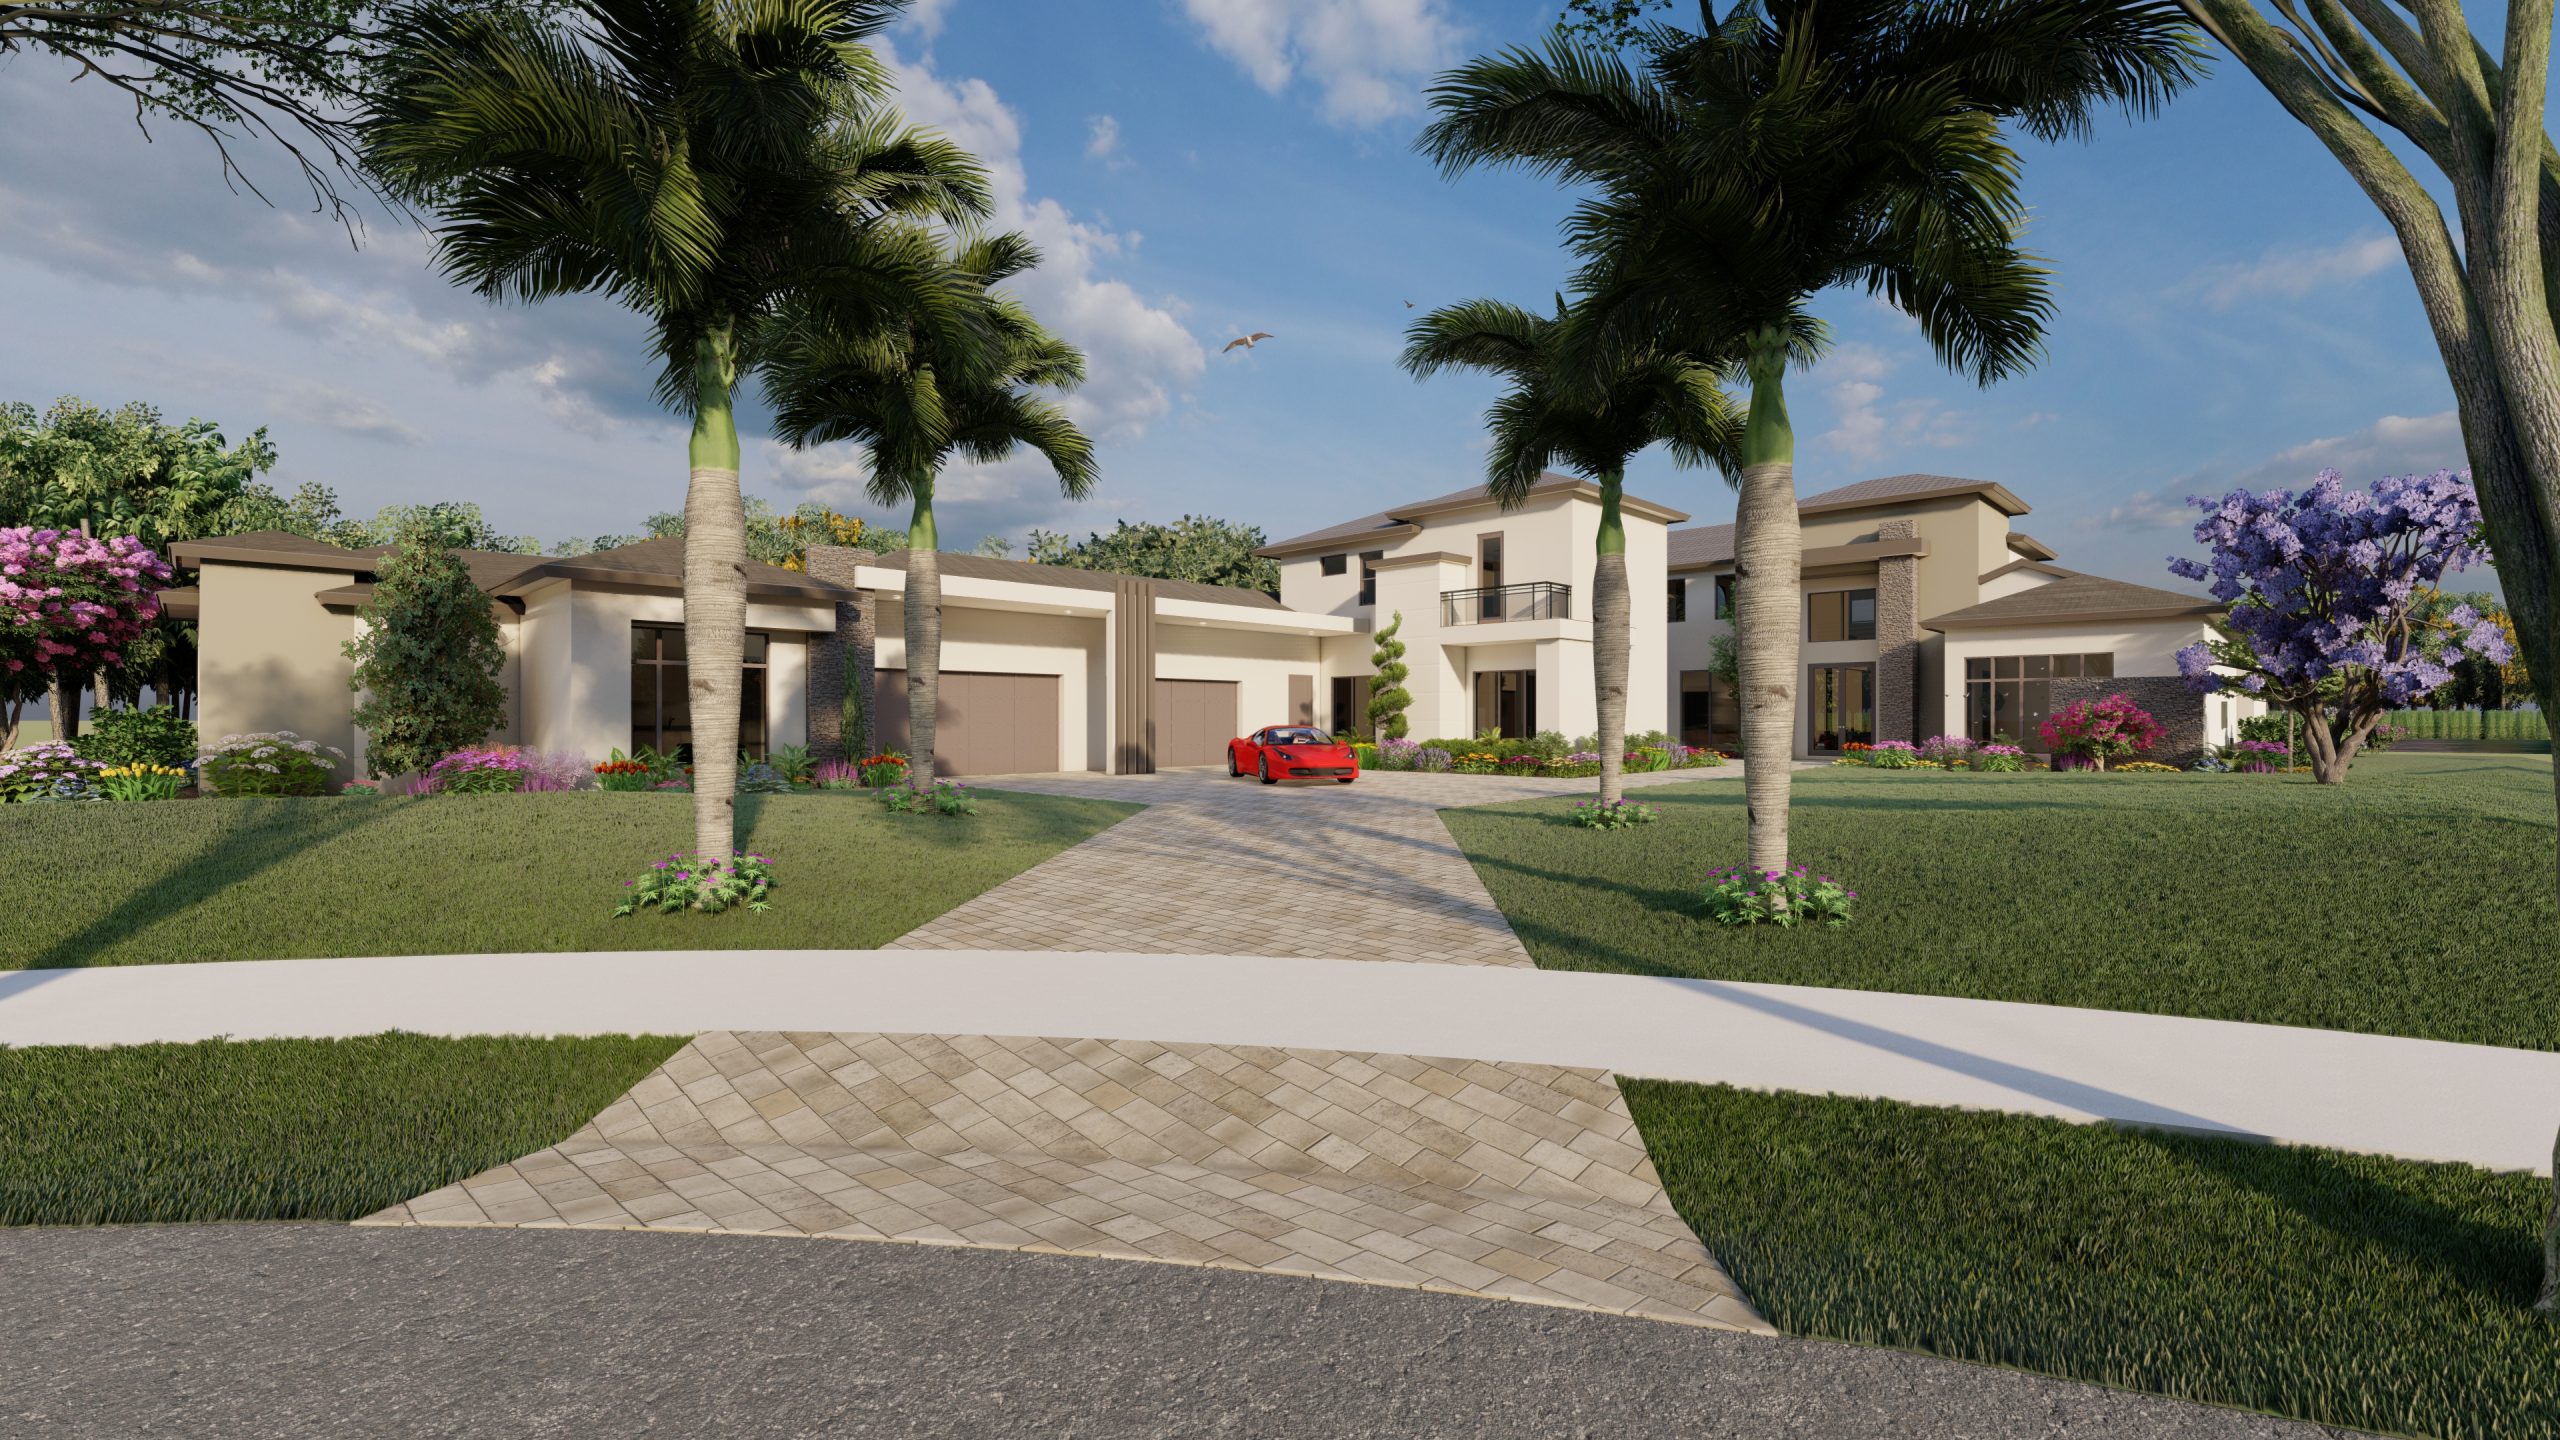 New Construction Homes in South Florida with Custom Homes